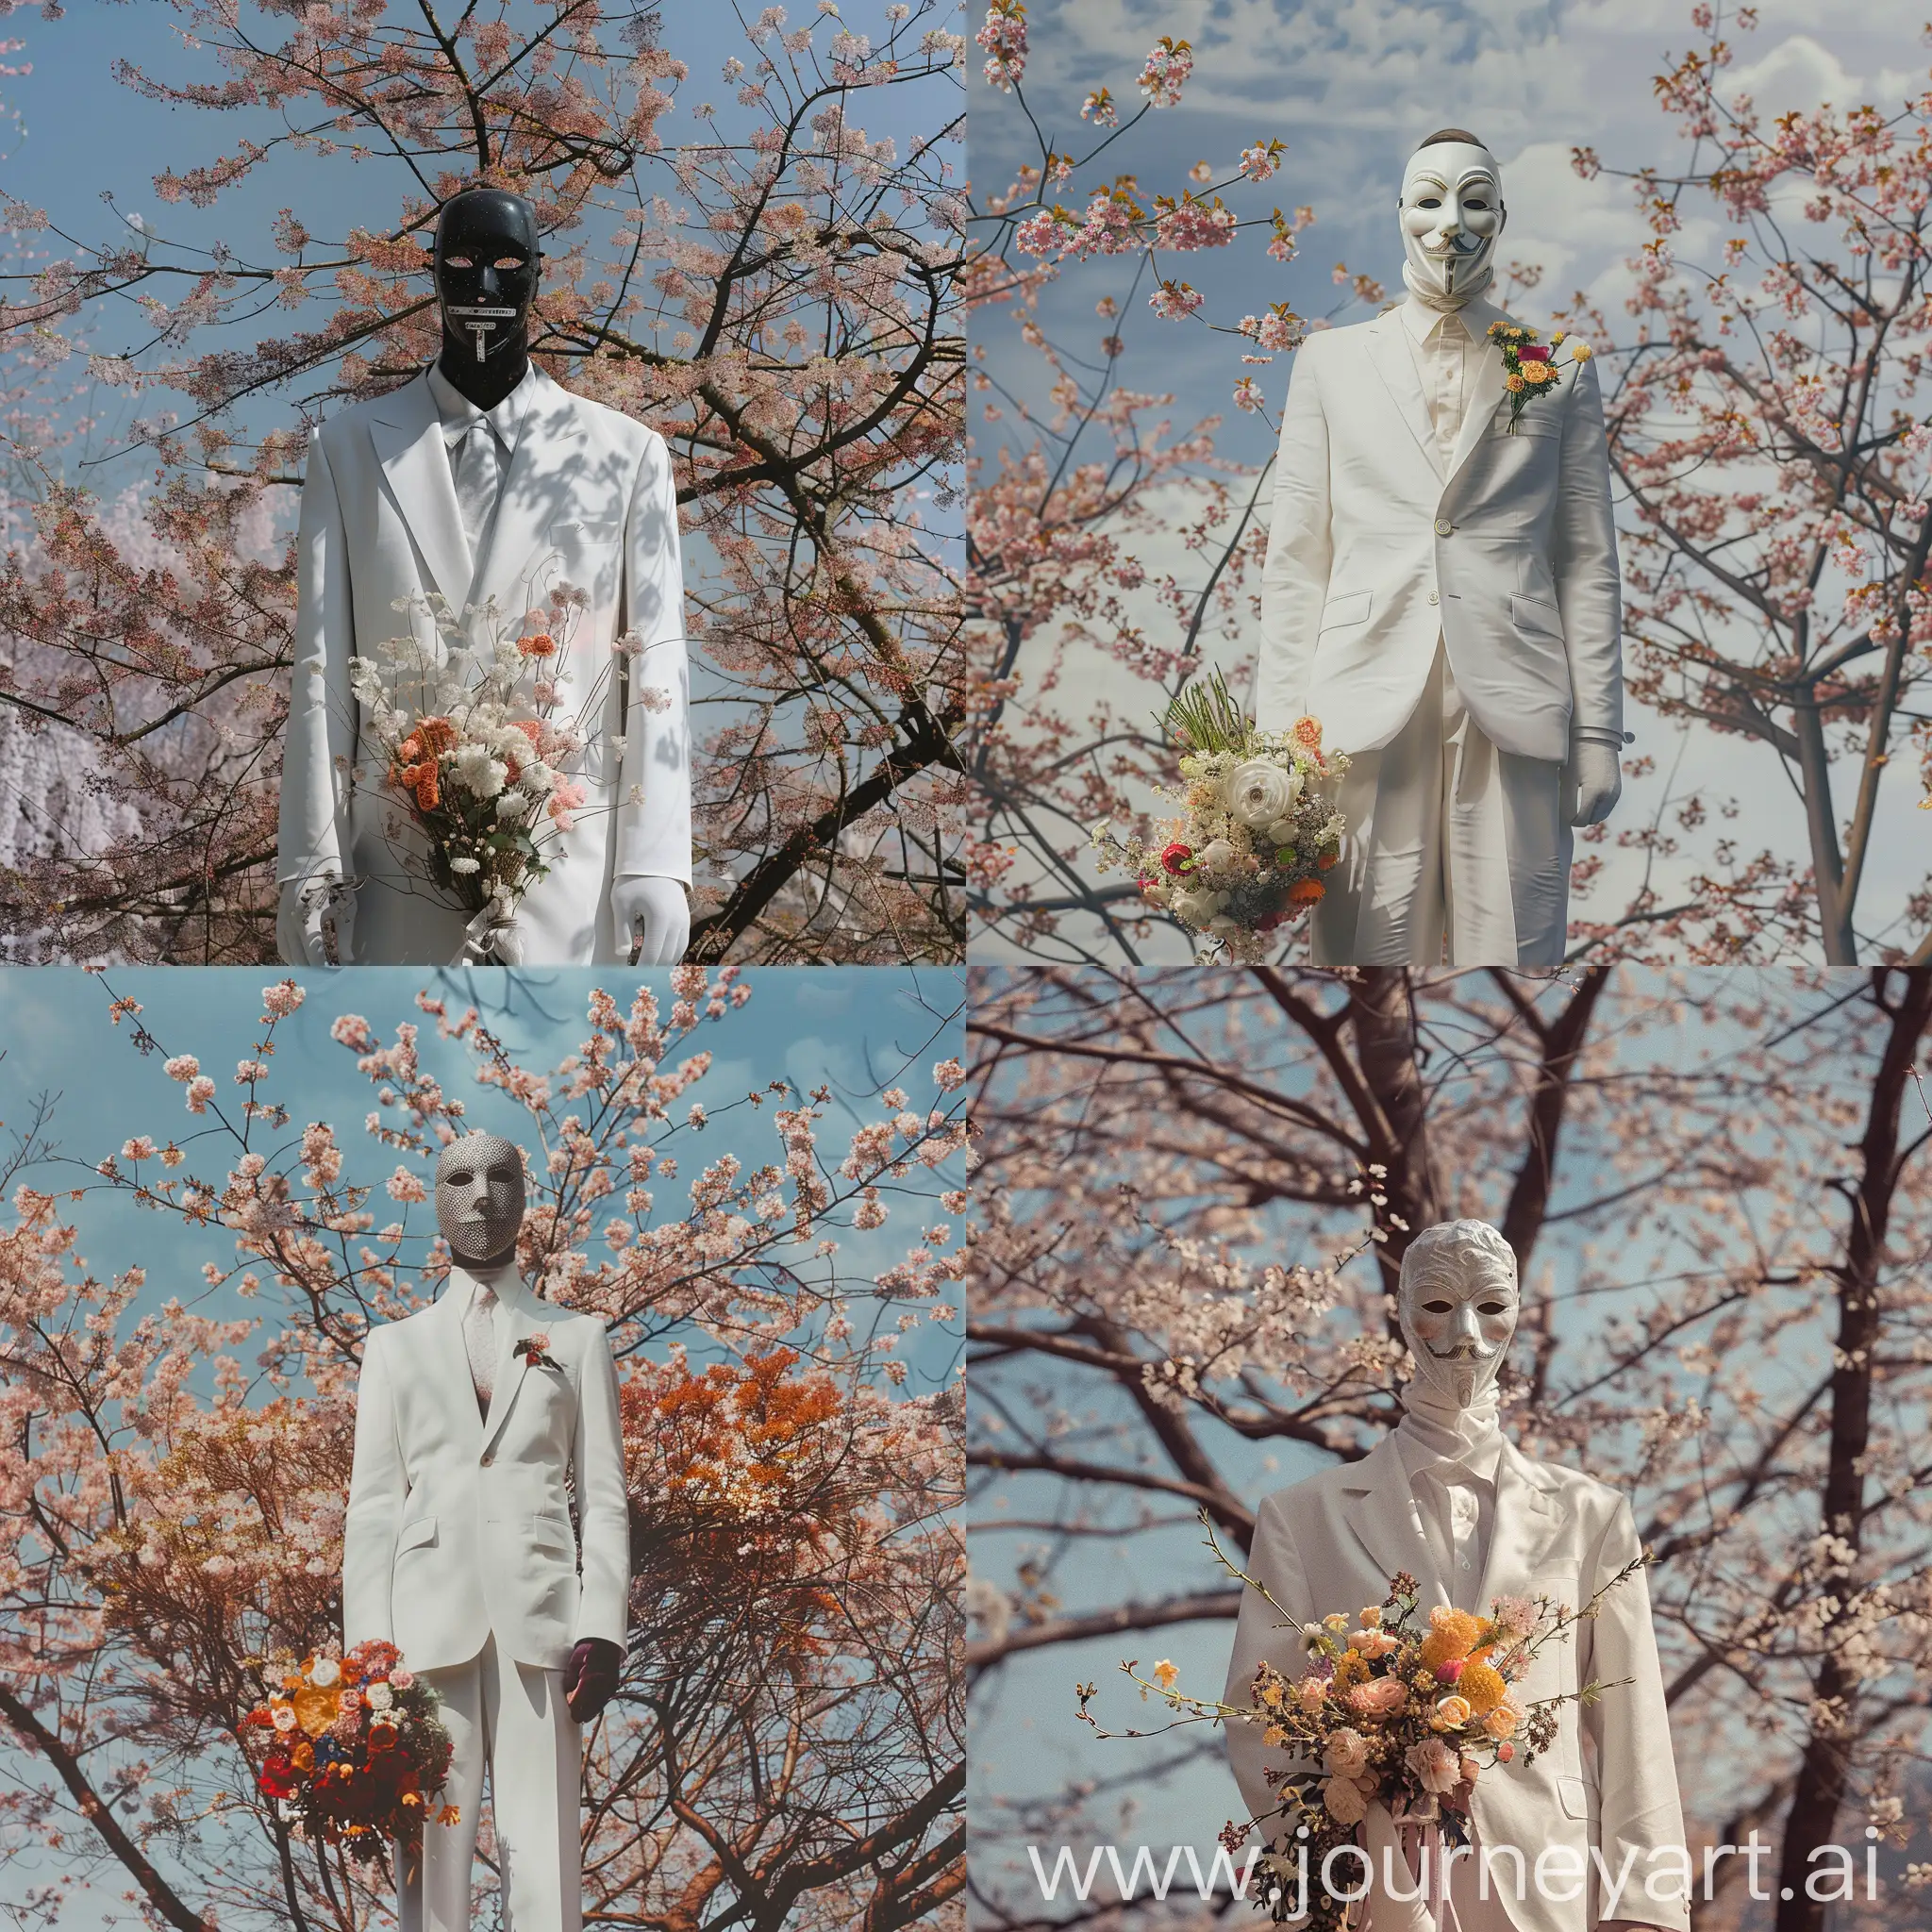 
A man in an anonymous mask stands in a white suit with a bouquet of flowers on a background of cherry blossoms